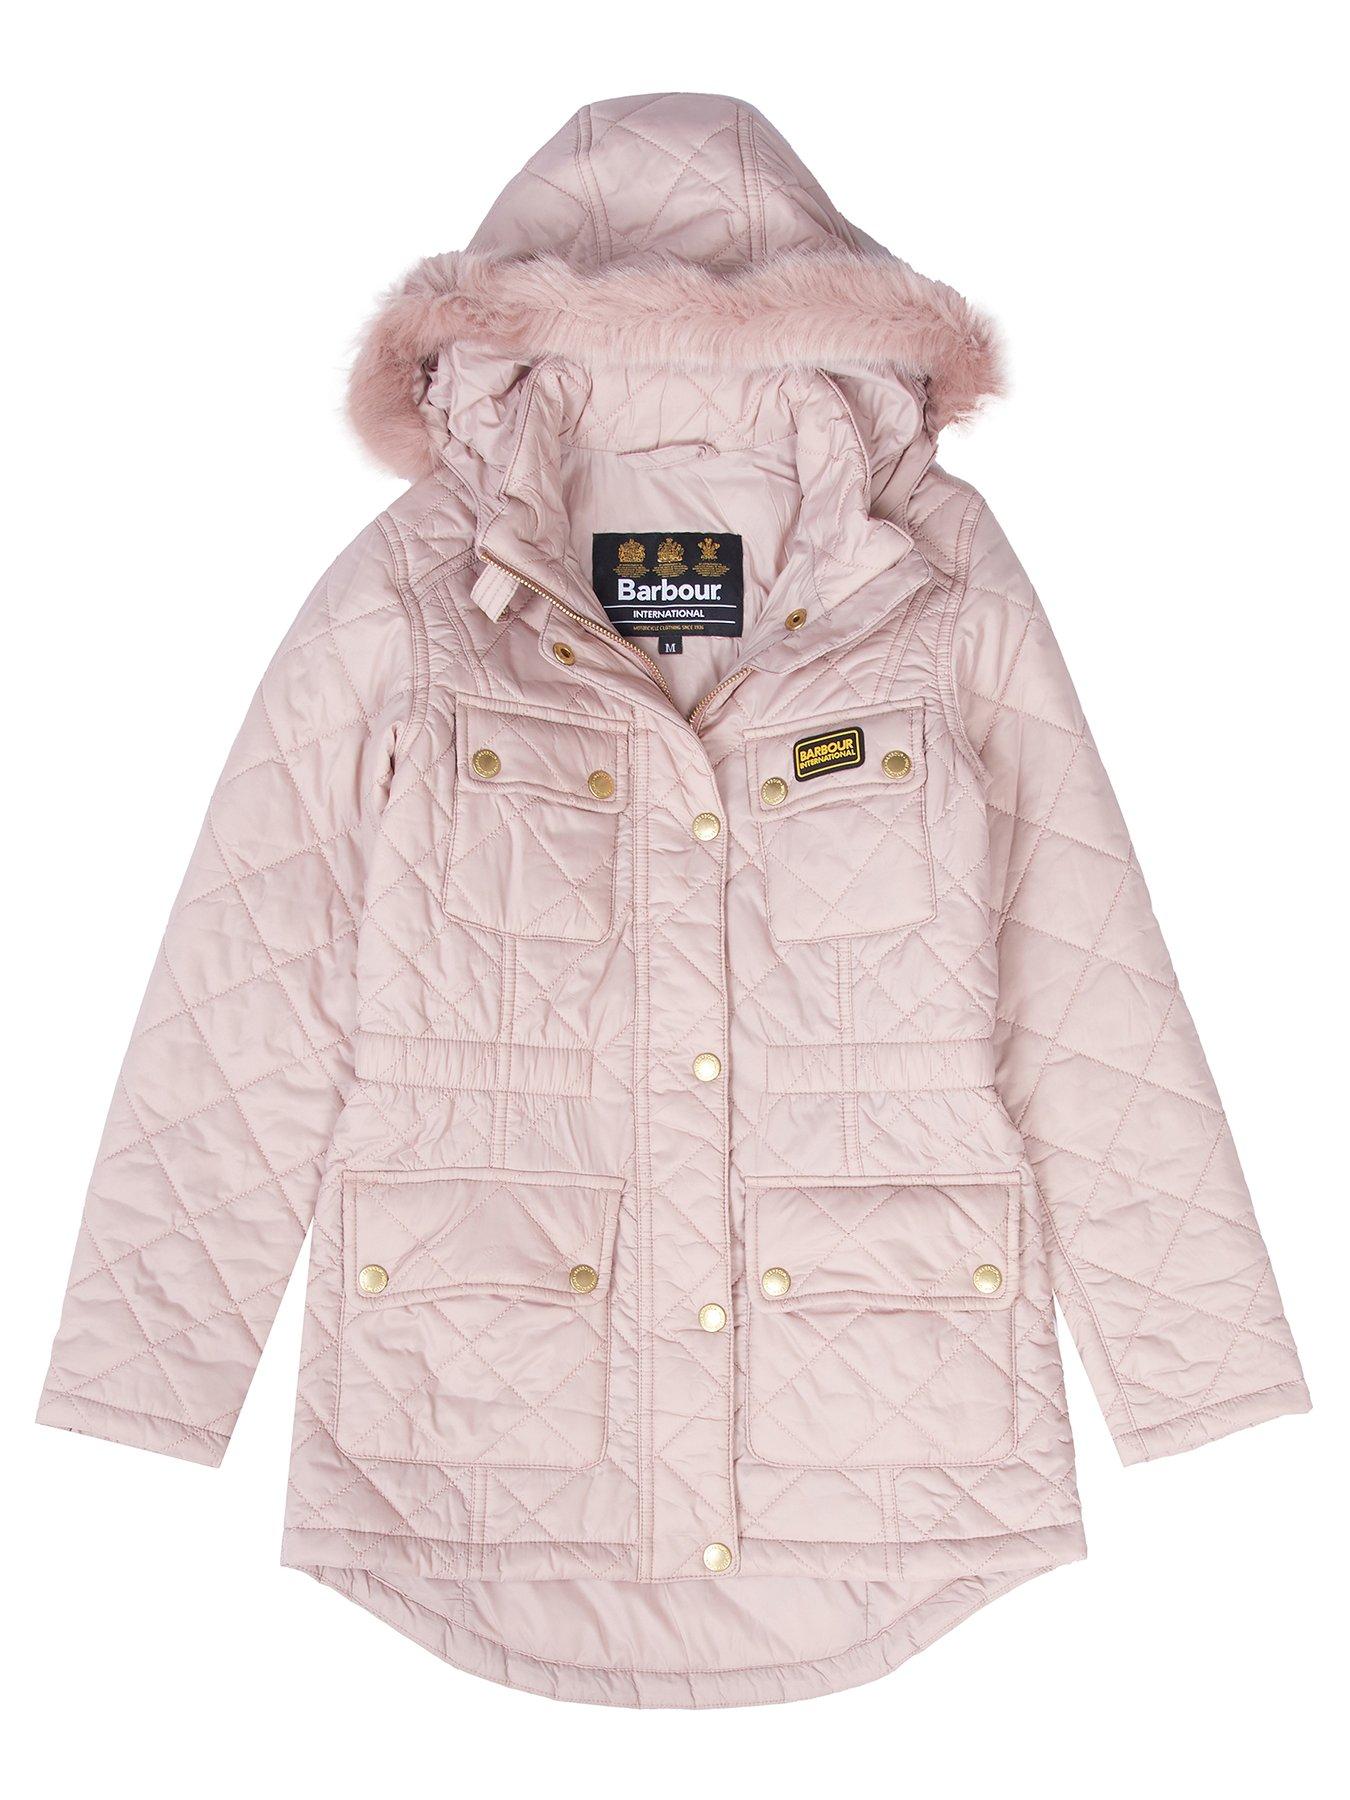 baby barbour clothes